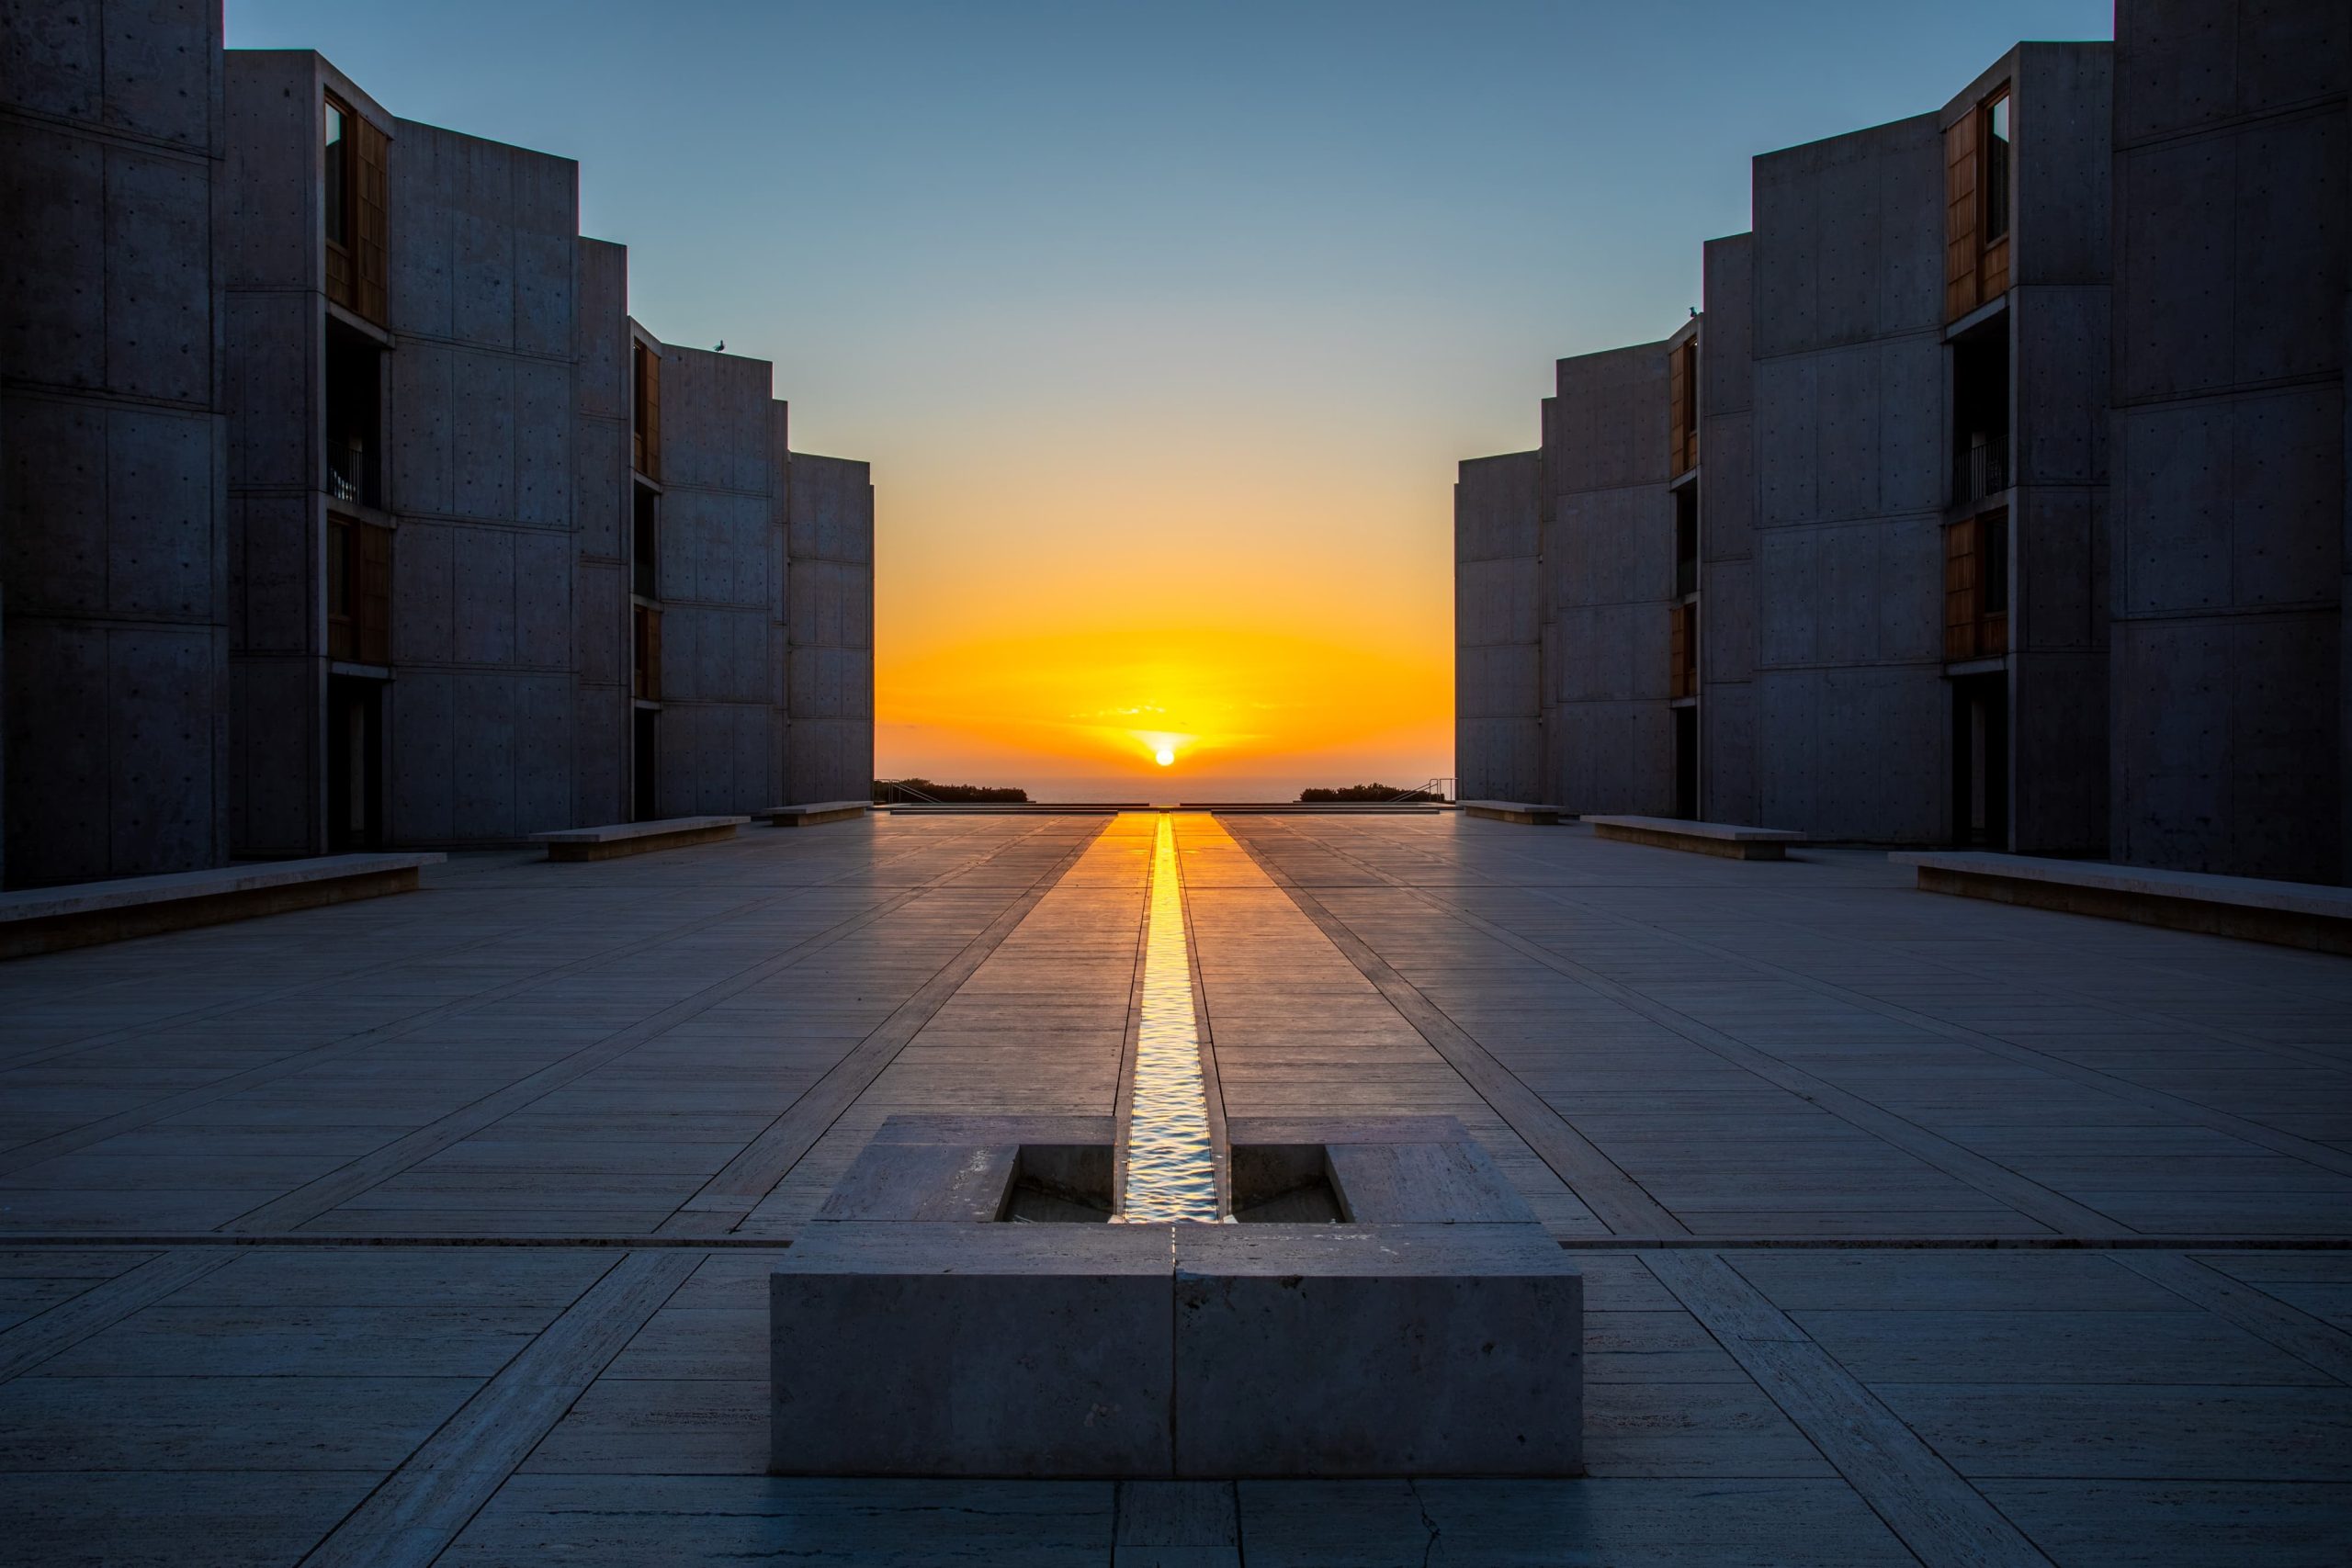 Louis Vuitton will showcase the 2023 Cruise Collection at the Salk  Institute, California